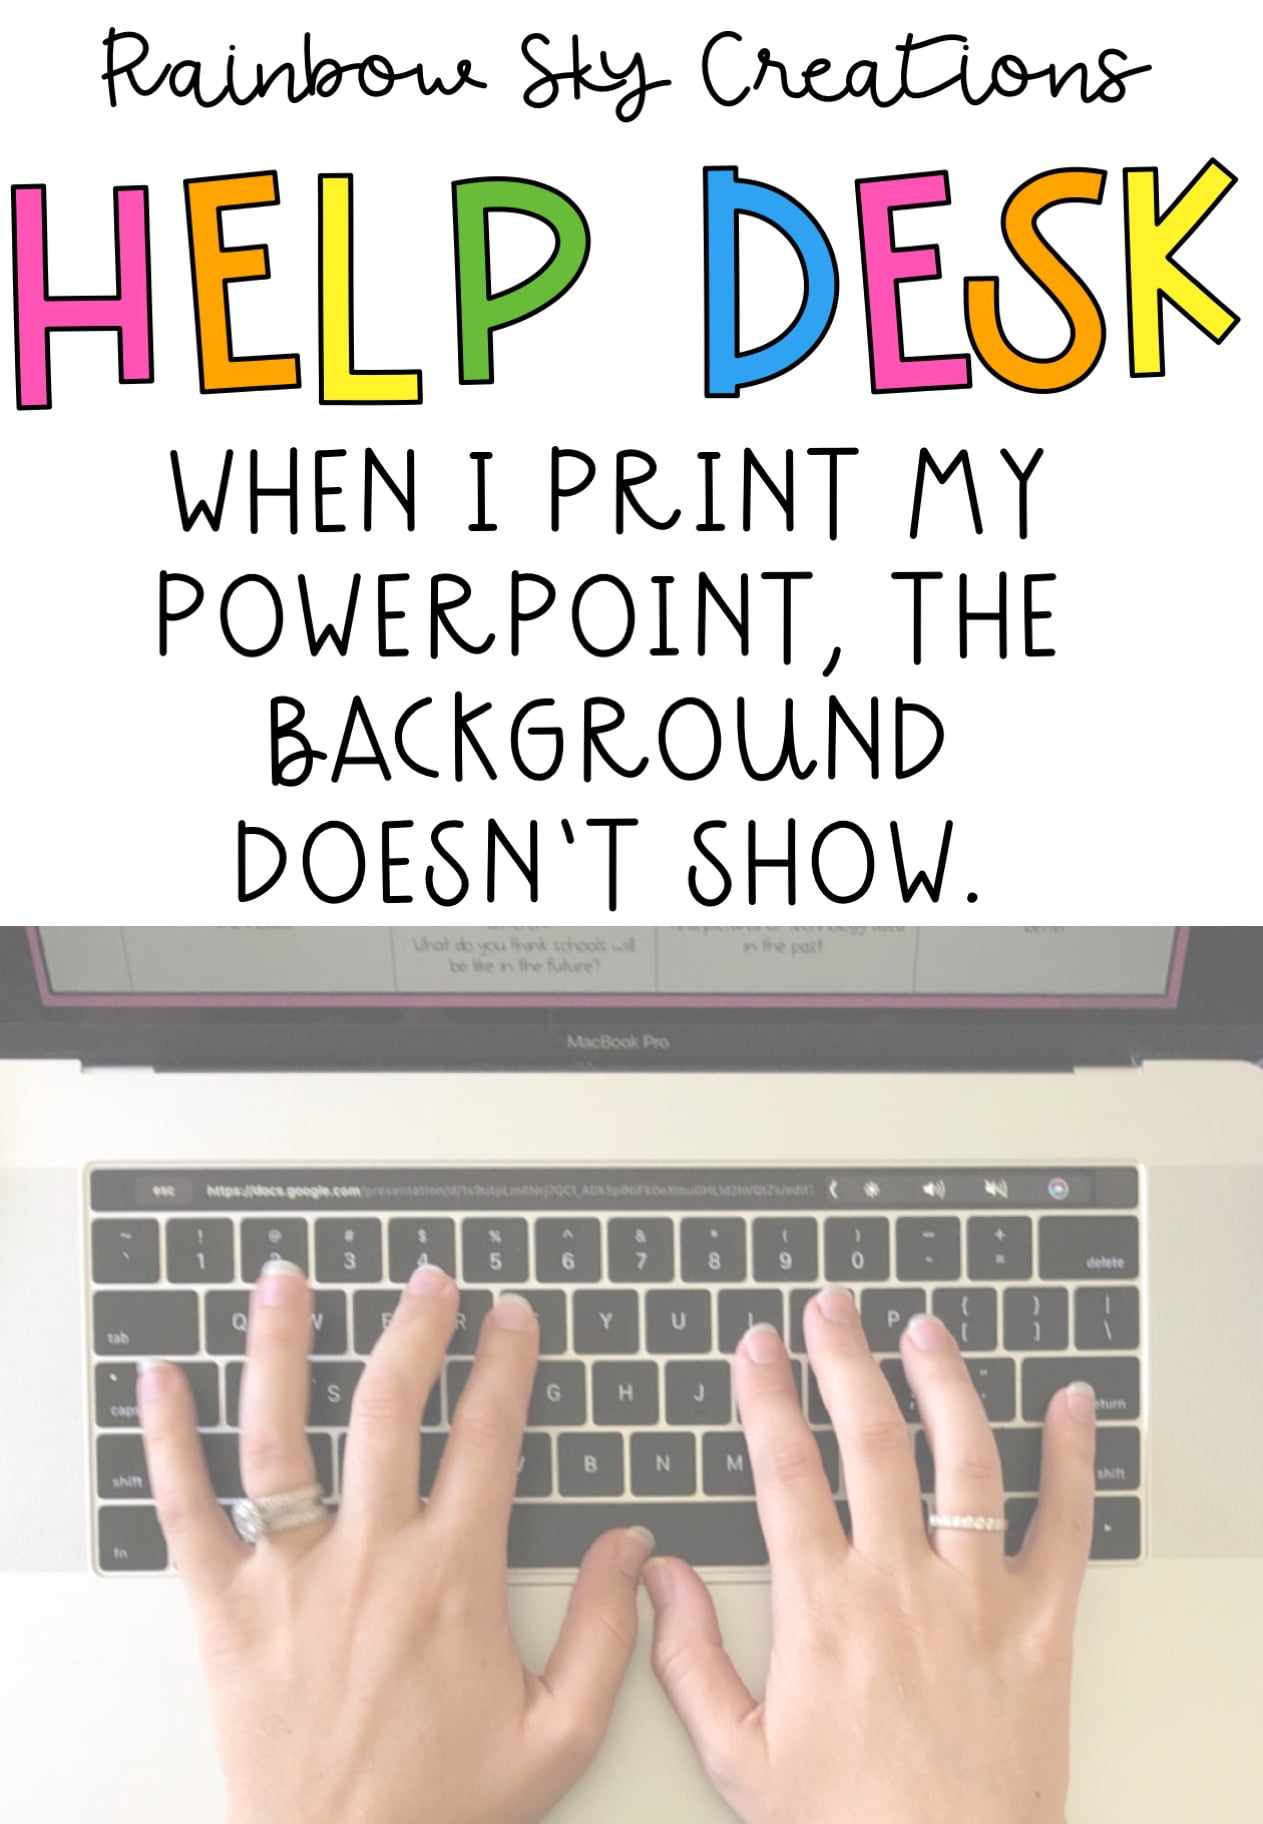 How to fix: When I print my PowerPoint, the background doesn’t show. - Rainbow Sky Creations